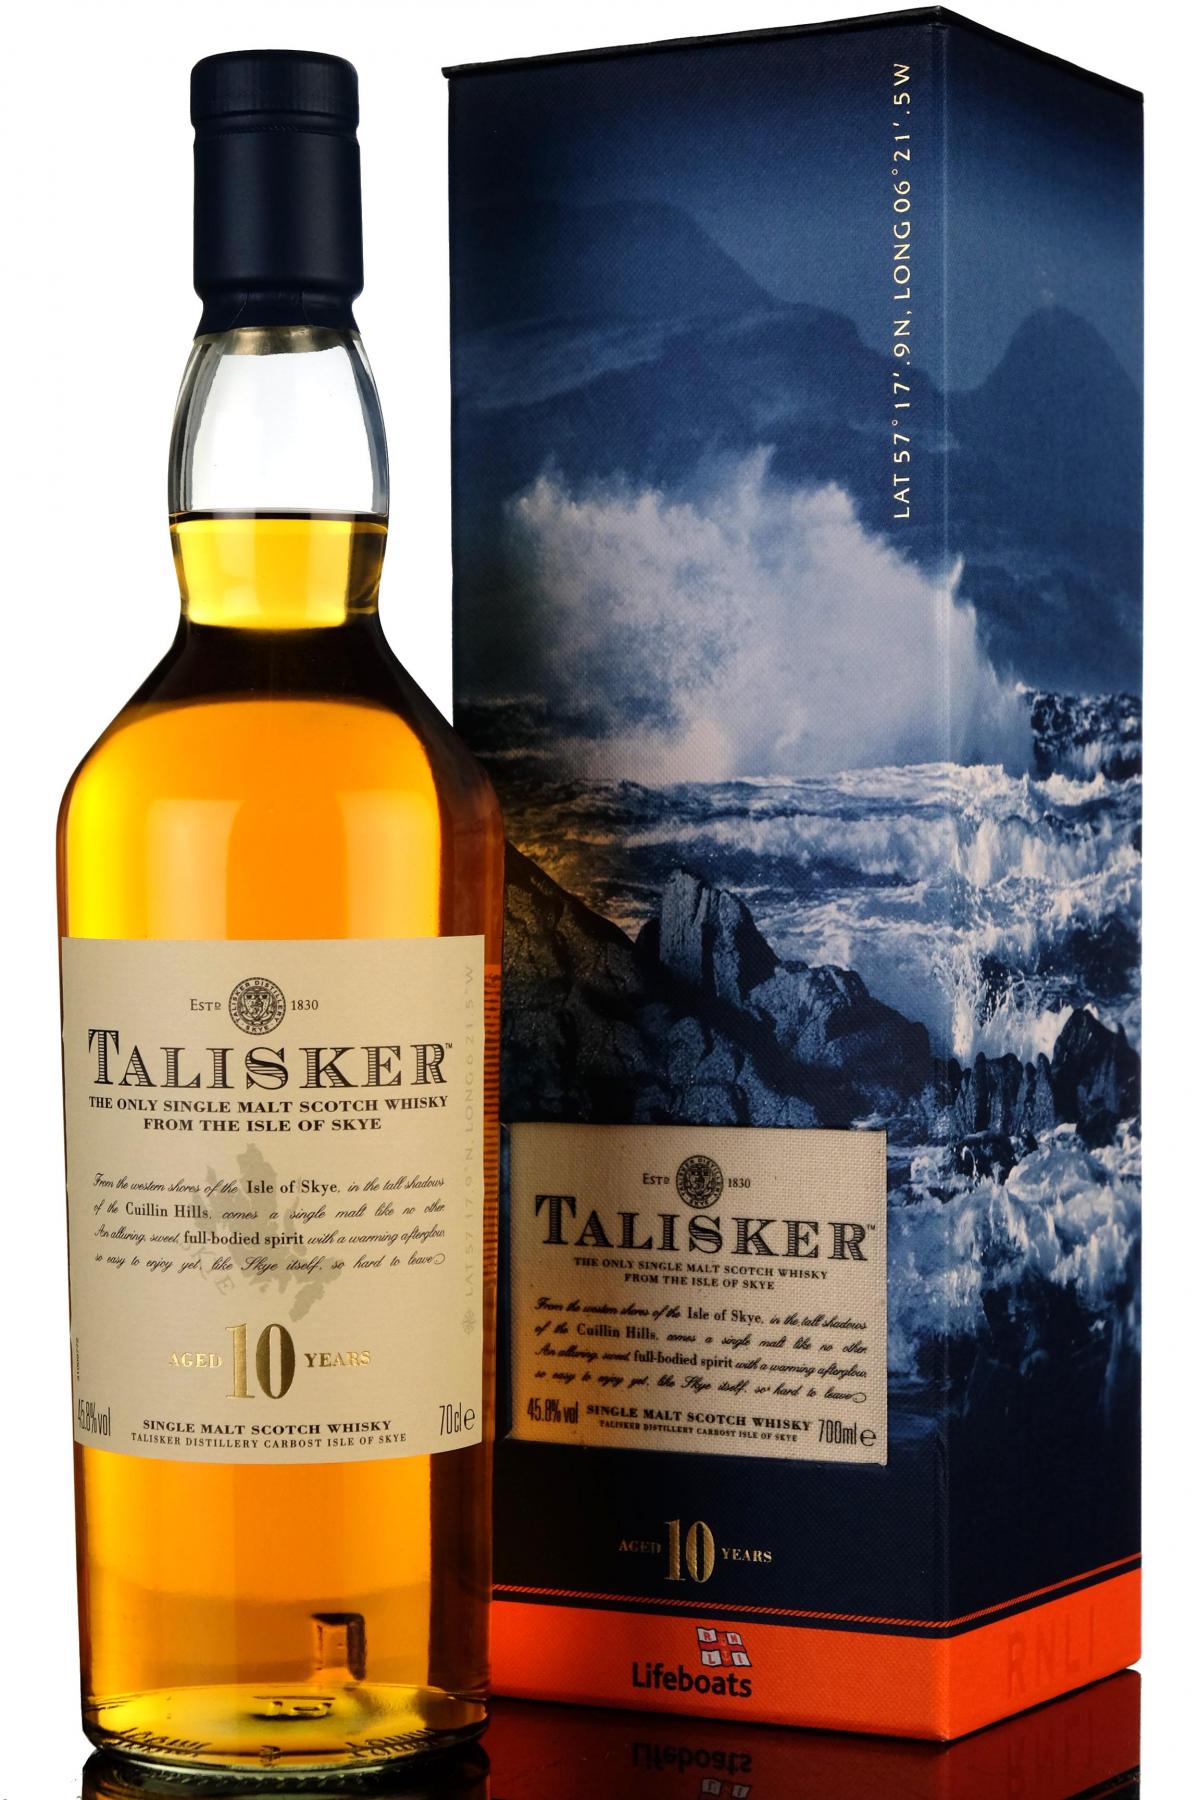 Talisker 10 Year Old - Lifeboats